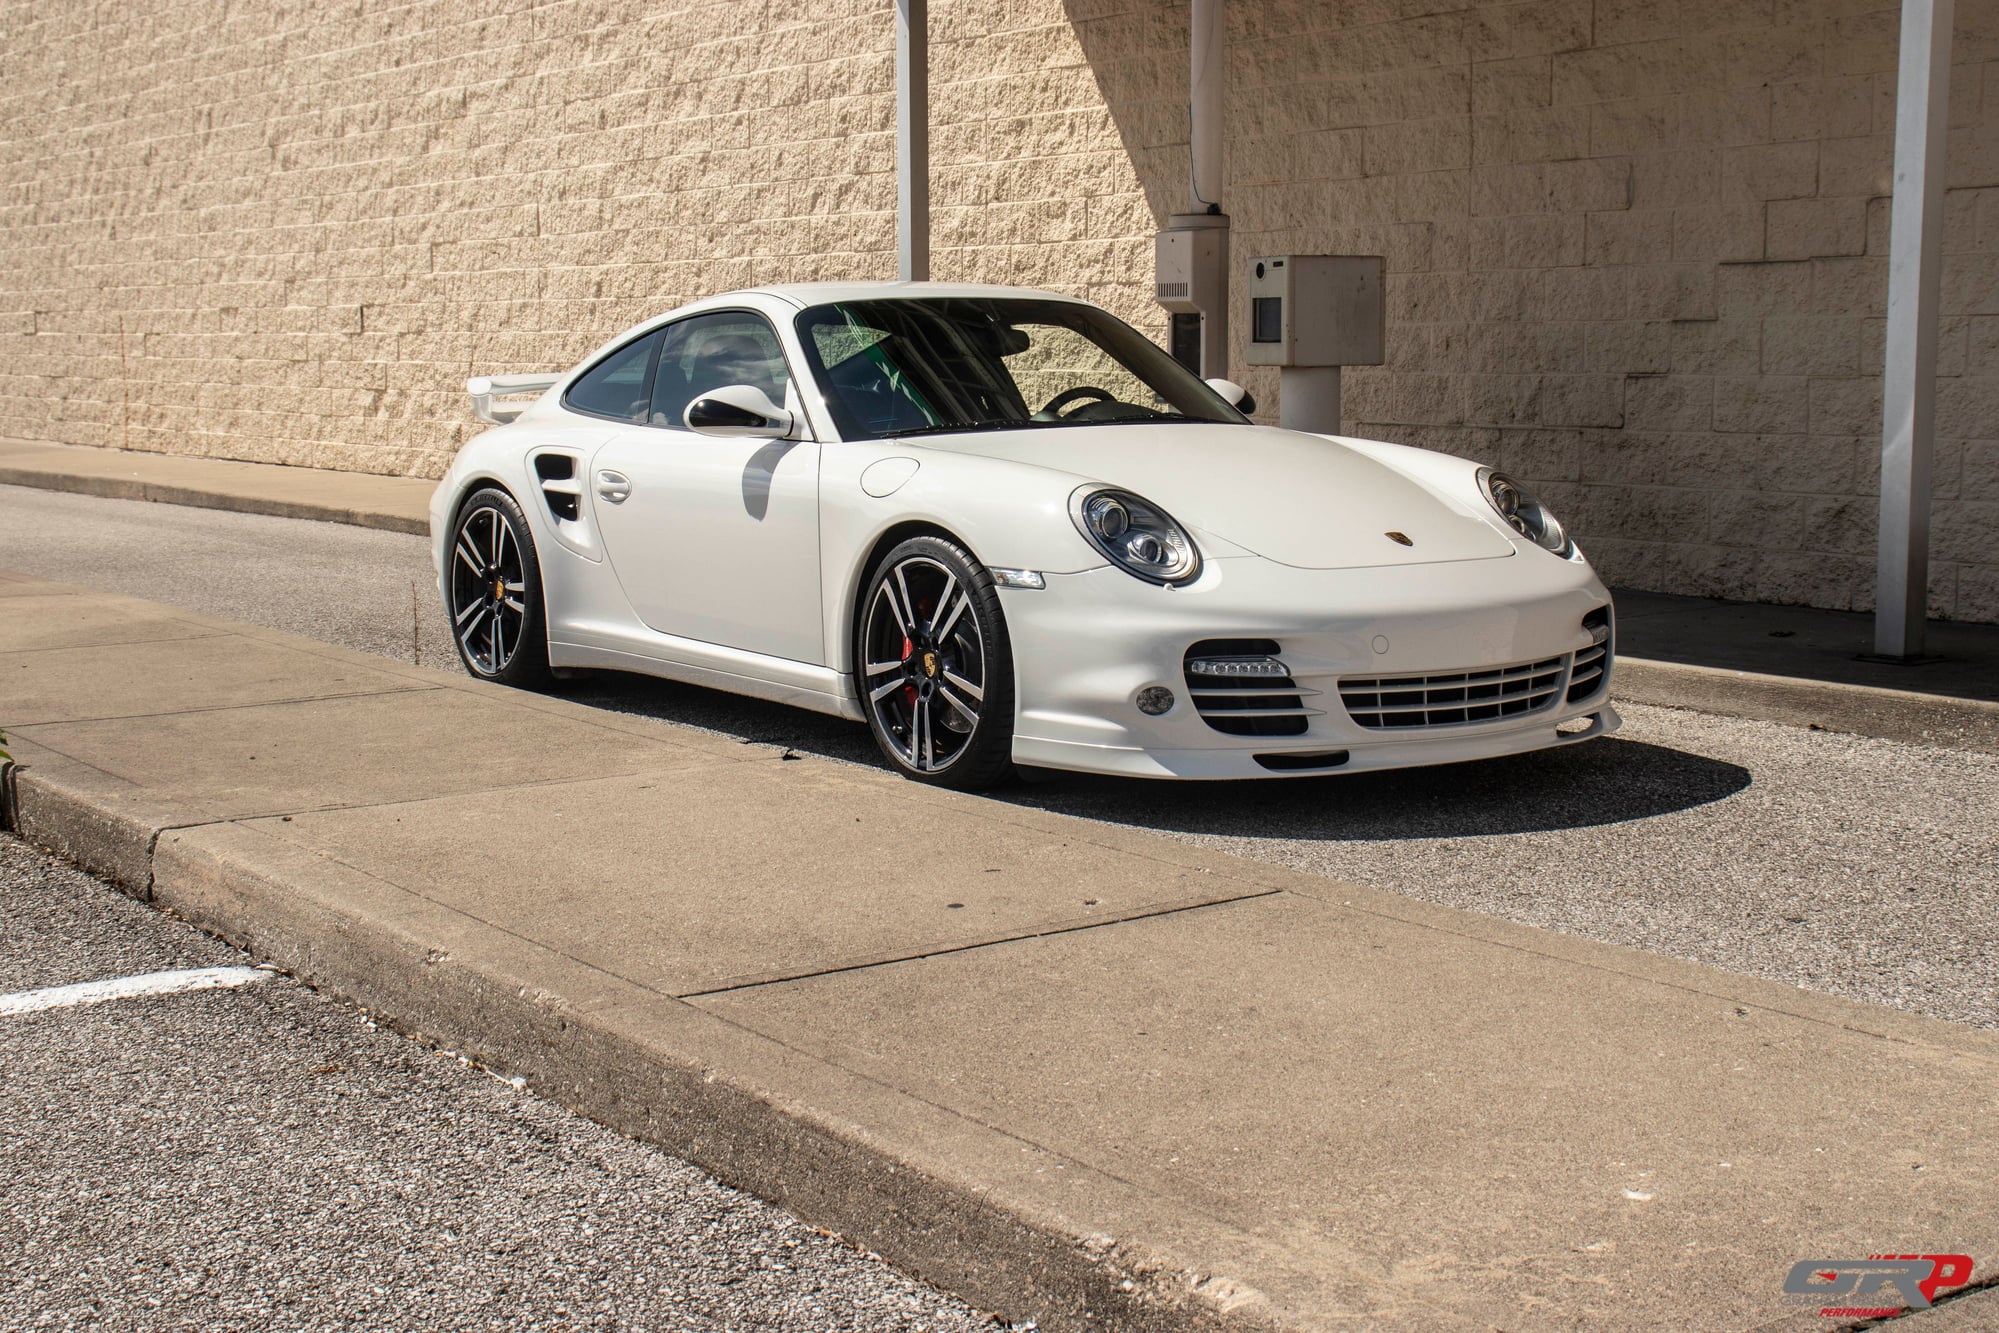 2011 Porsche 911 - 2011 Porsche 911 Turbo - Factory Aero Kit - Used - VIN WP0AD2A92BS766658 - 13,313 Miles - 6 cyl - AWD - Automatic - Coupe - White - Brownsburg, IN 46112, United States